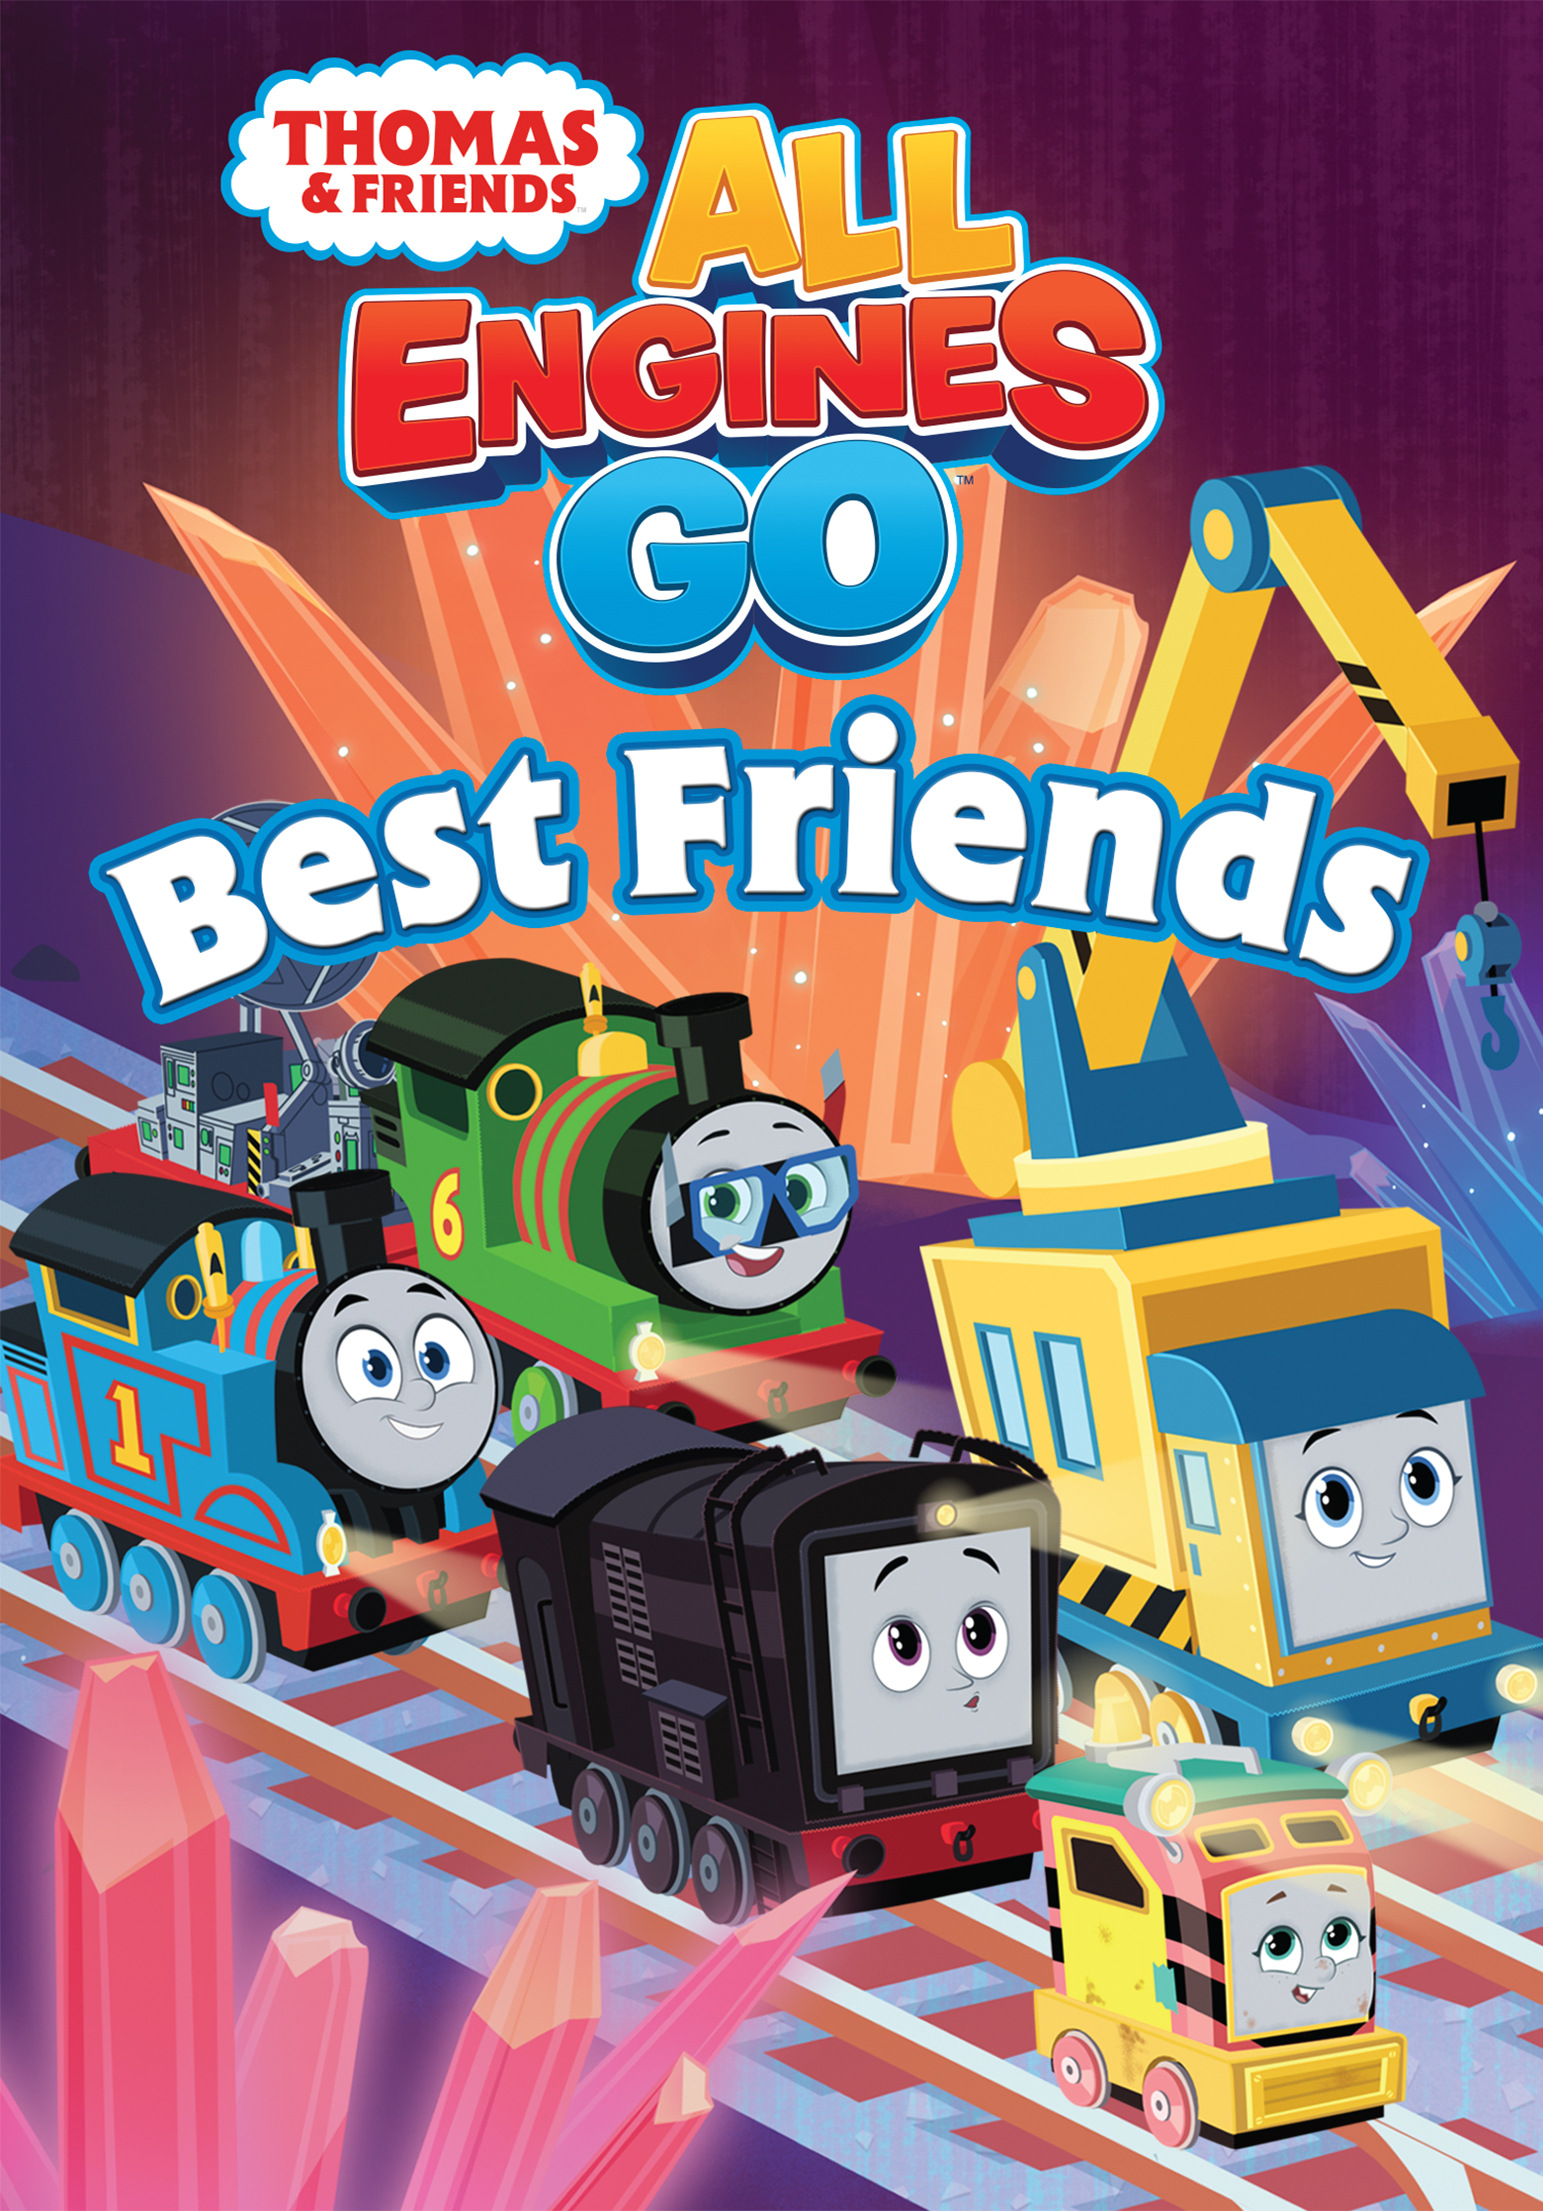 Thomas & Friends: All Engines Go! Best Friends